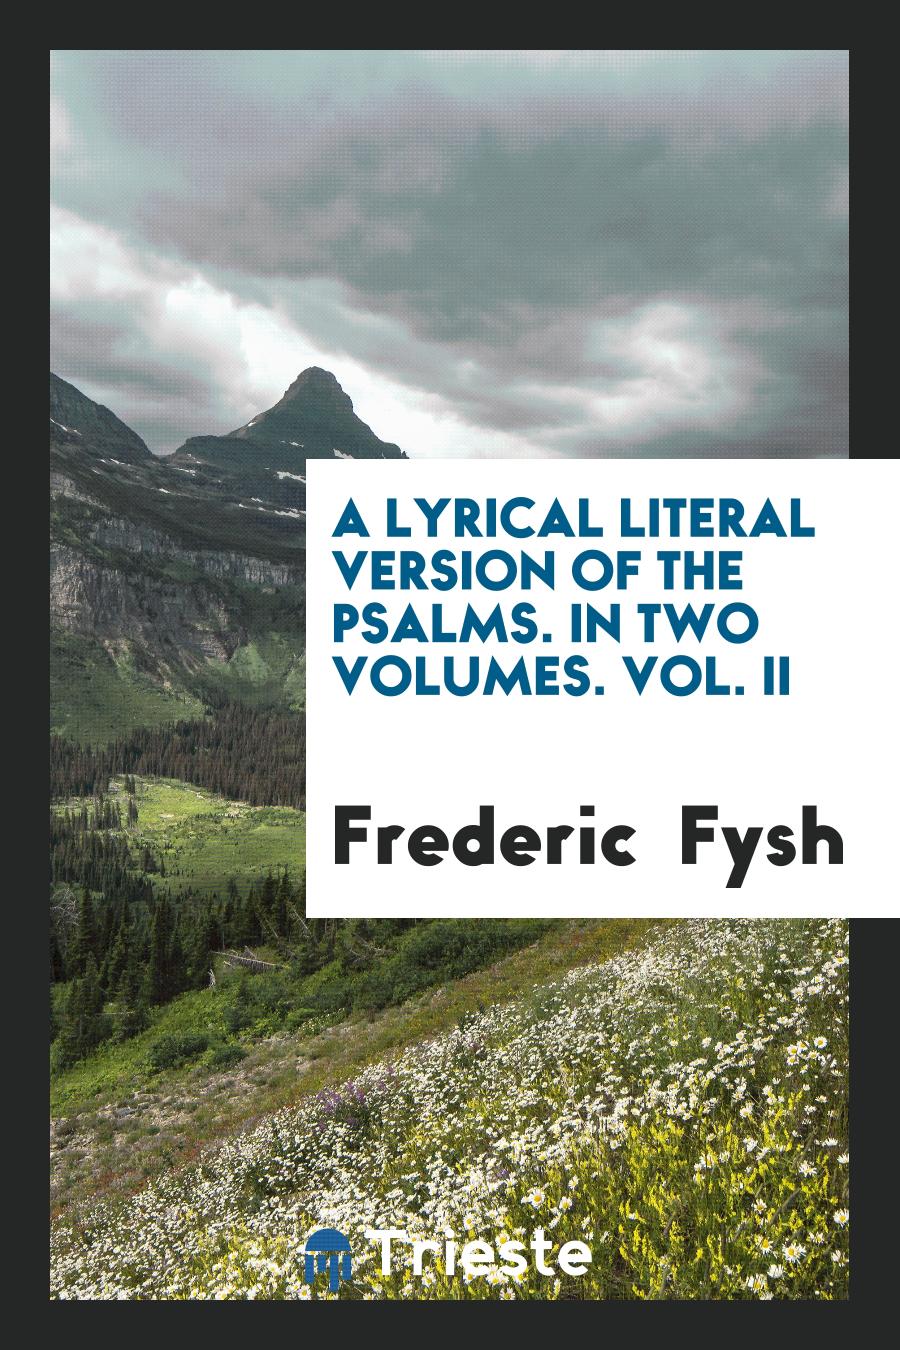 A Lyrical Literal Version of the Psalms. In Two Volumes. Vol. II